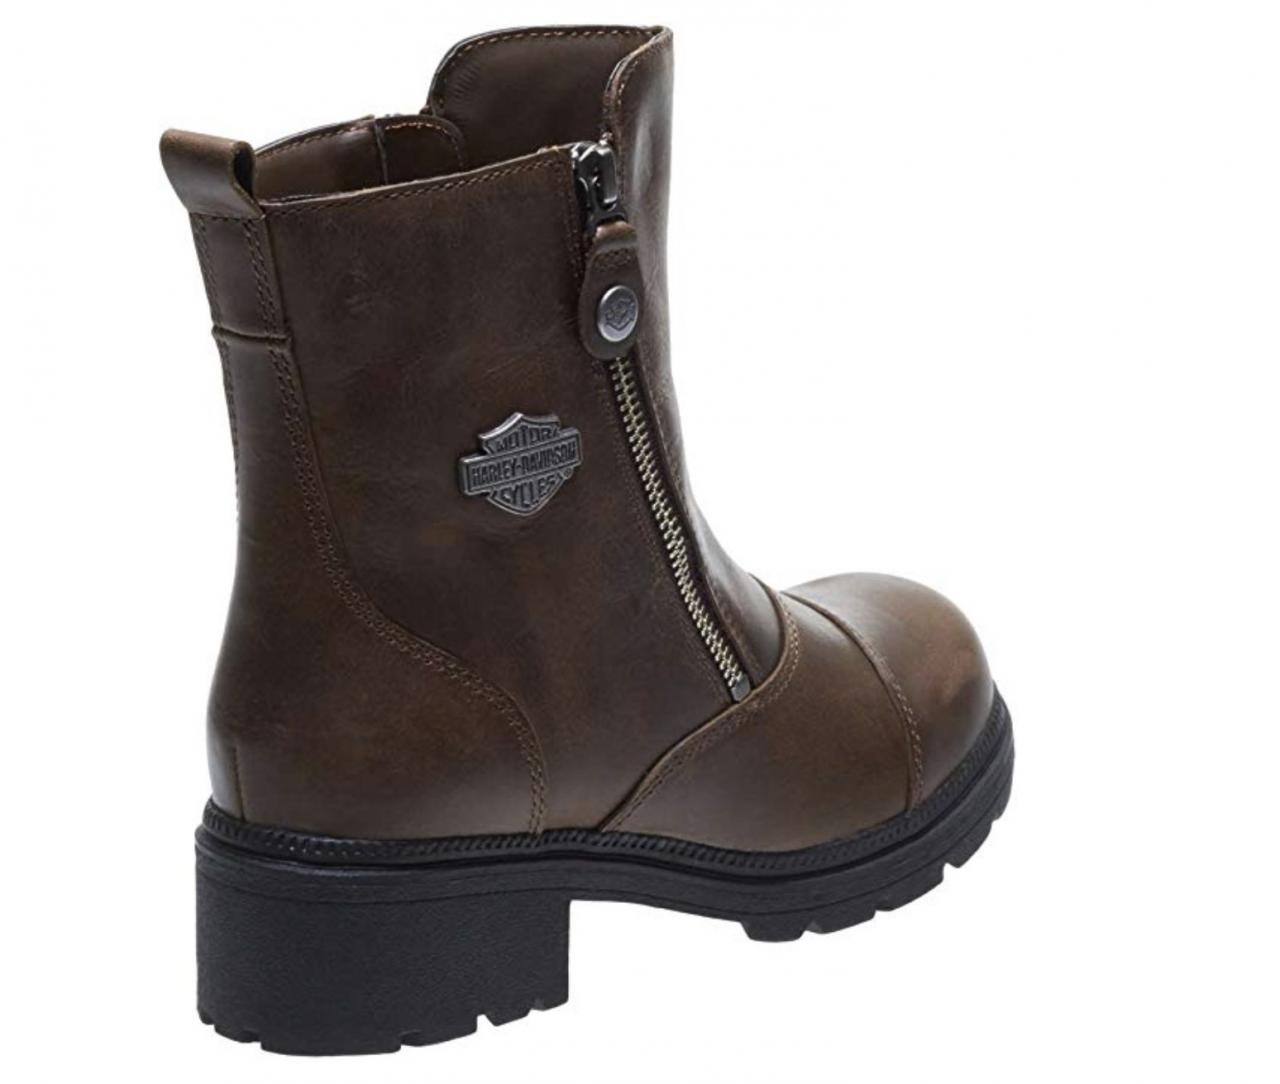 Harley-Davidson Womens Amherst Motorcycle Boot Boots